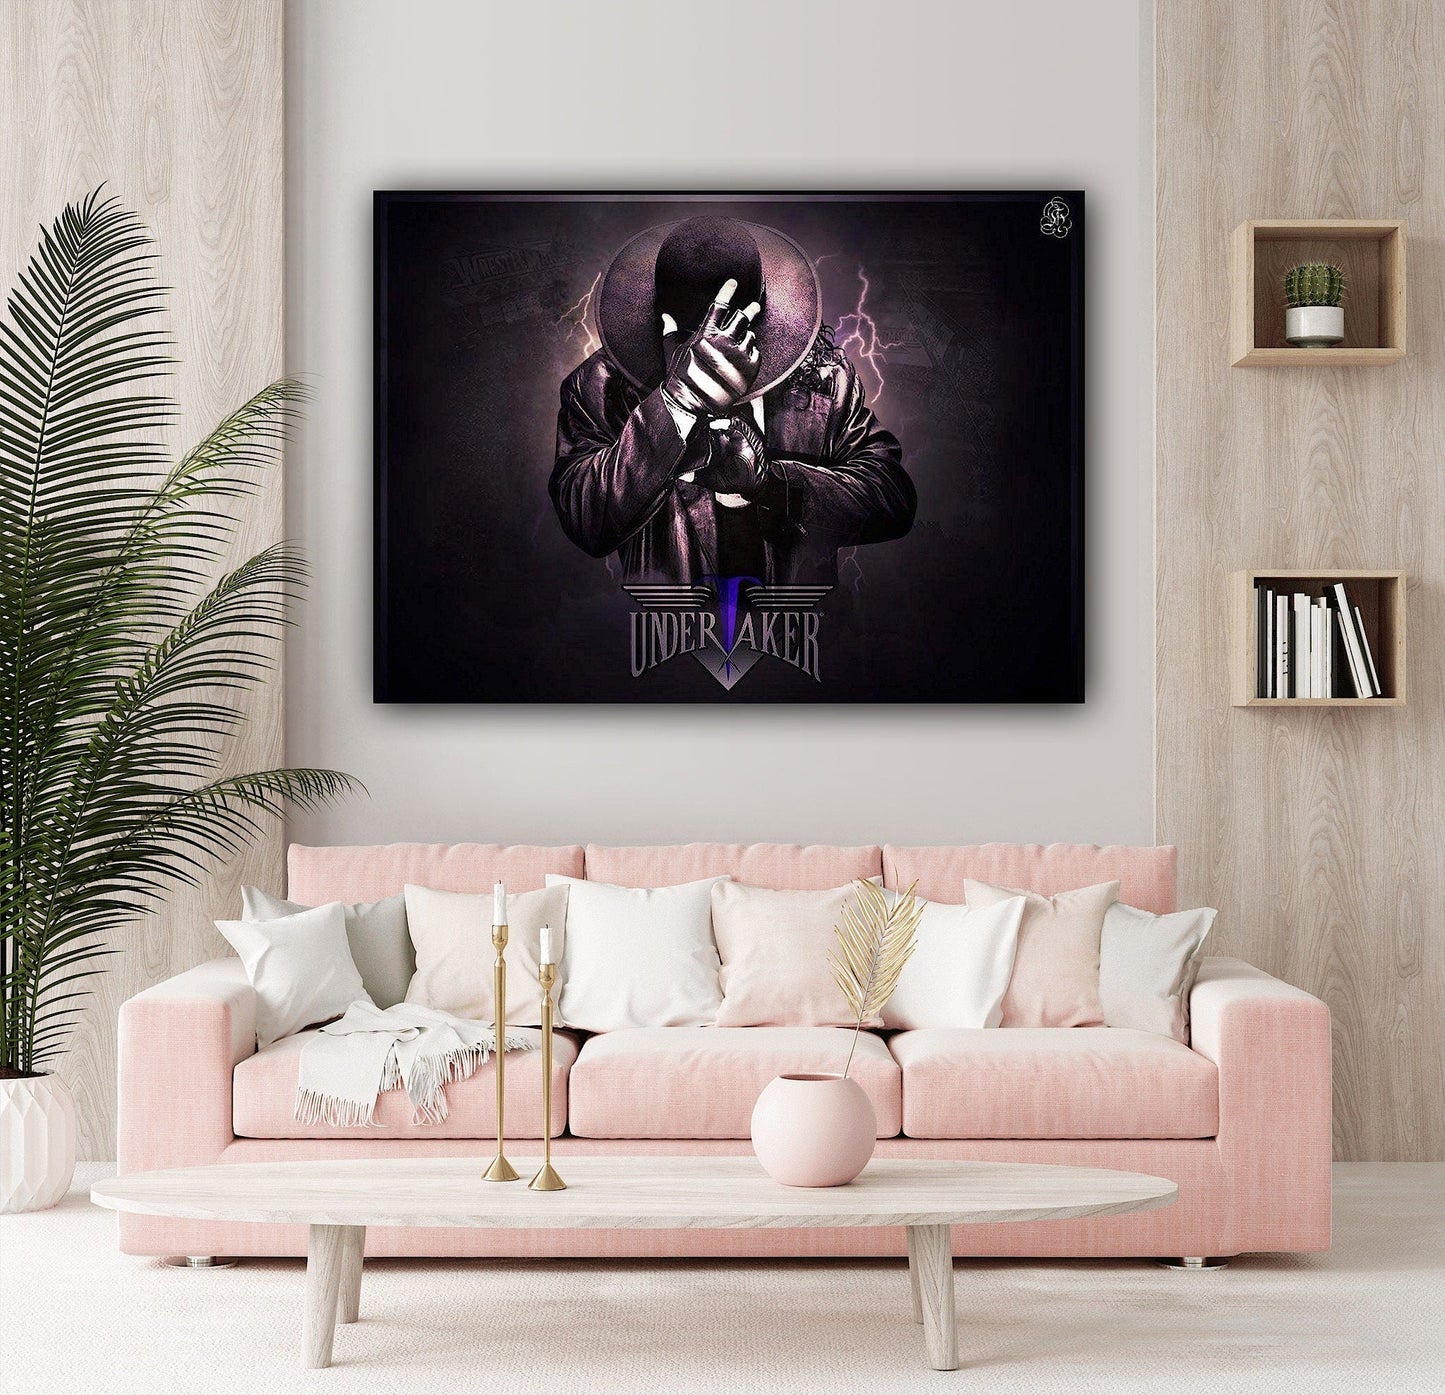 The Undertaker Canvas